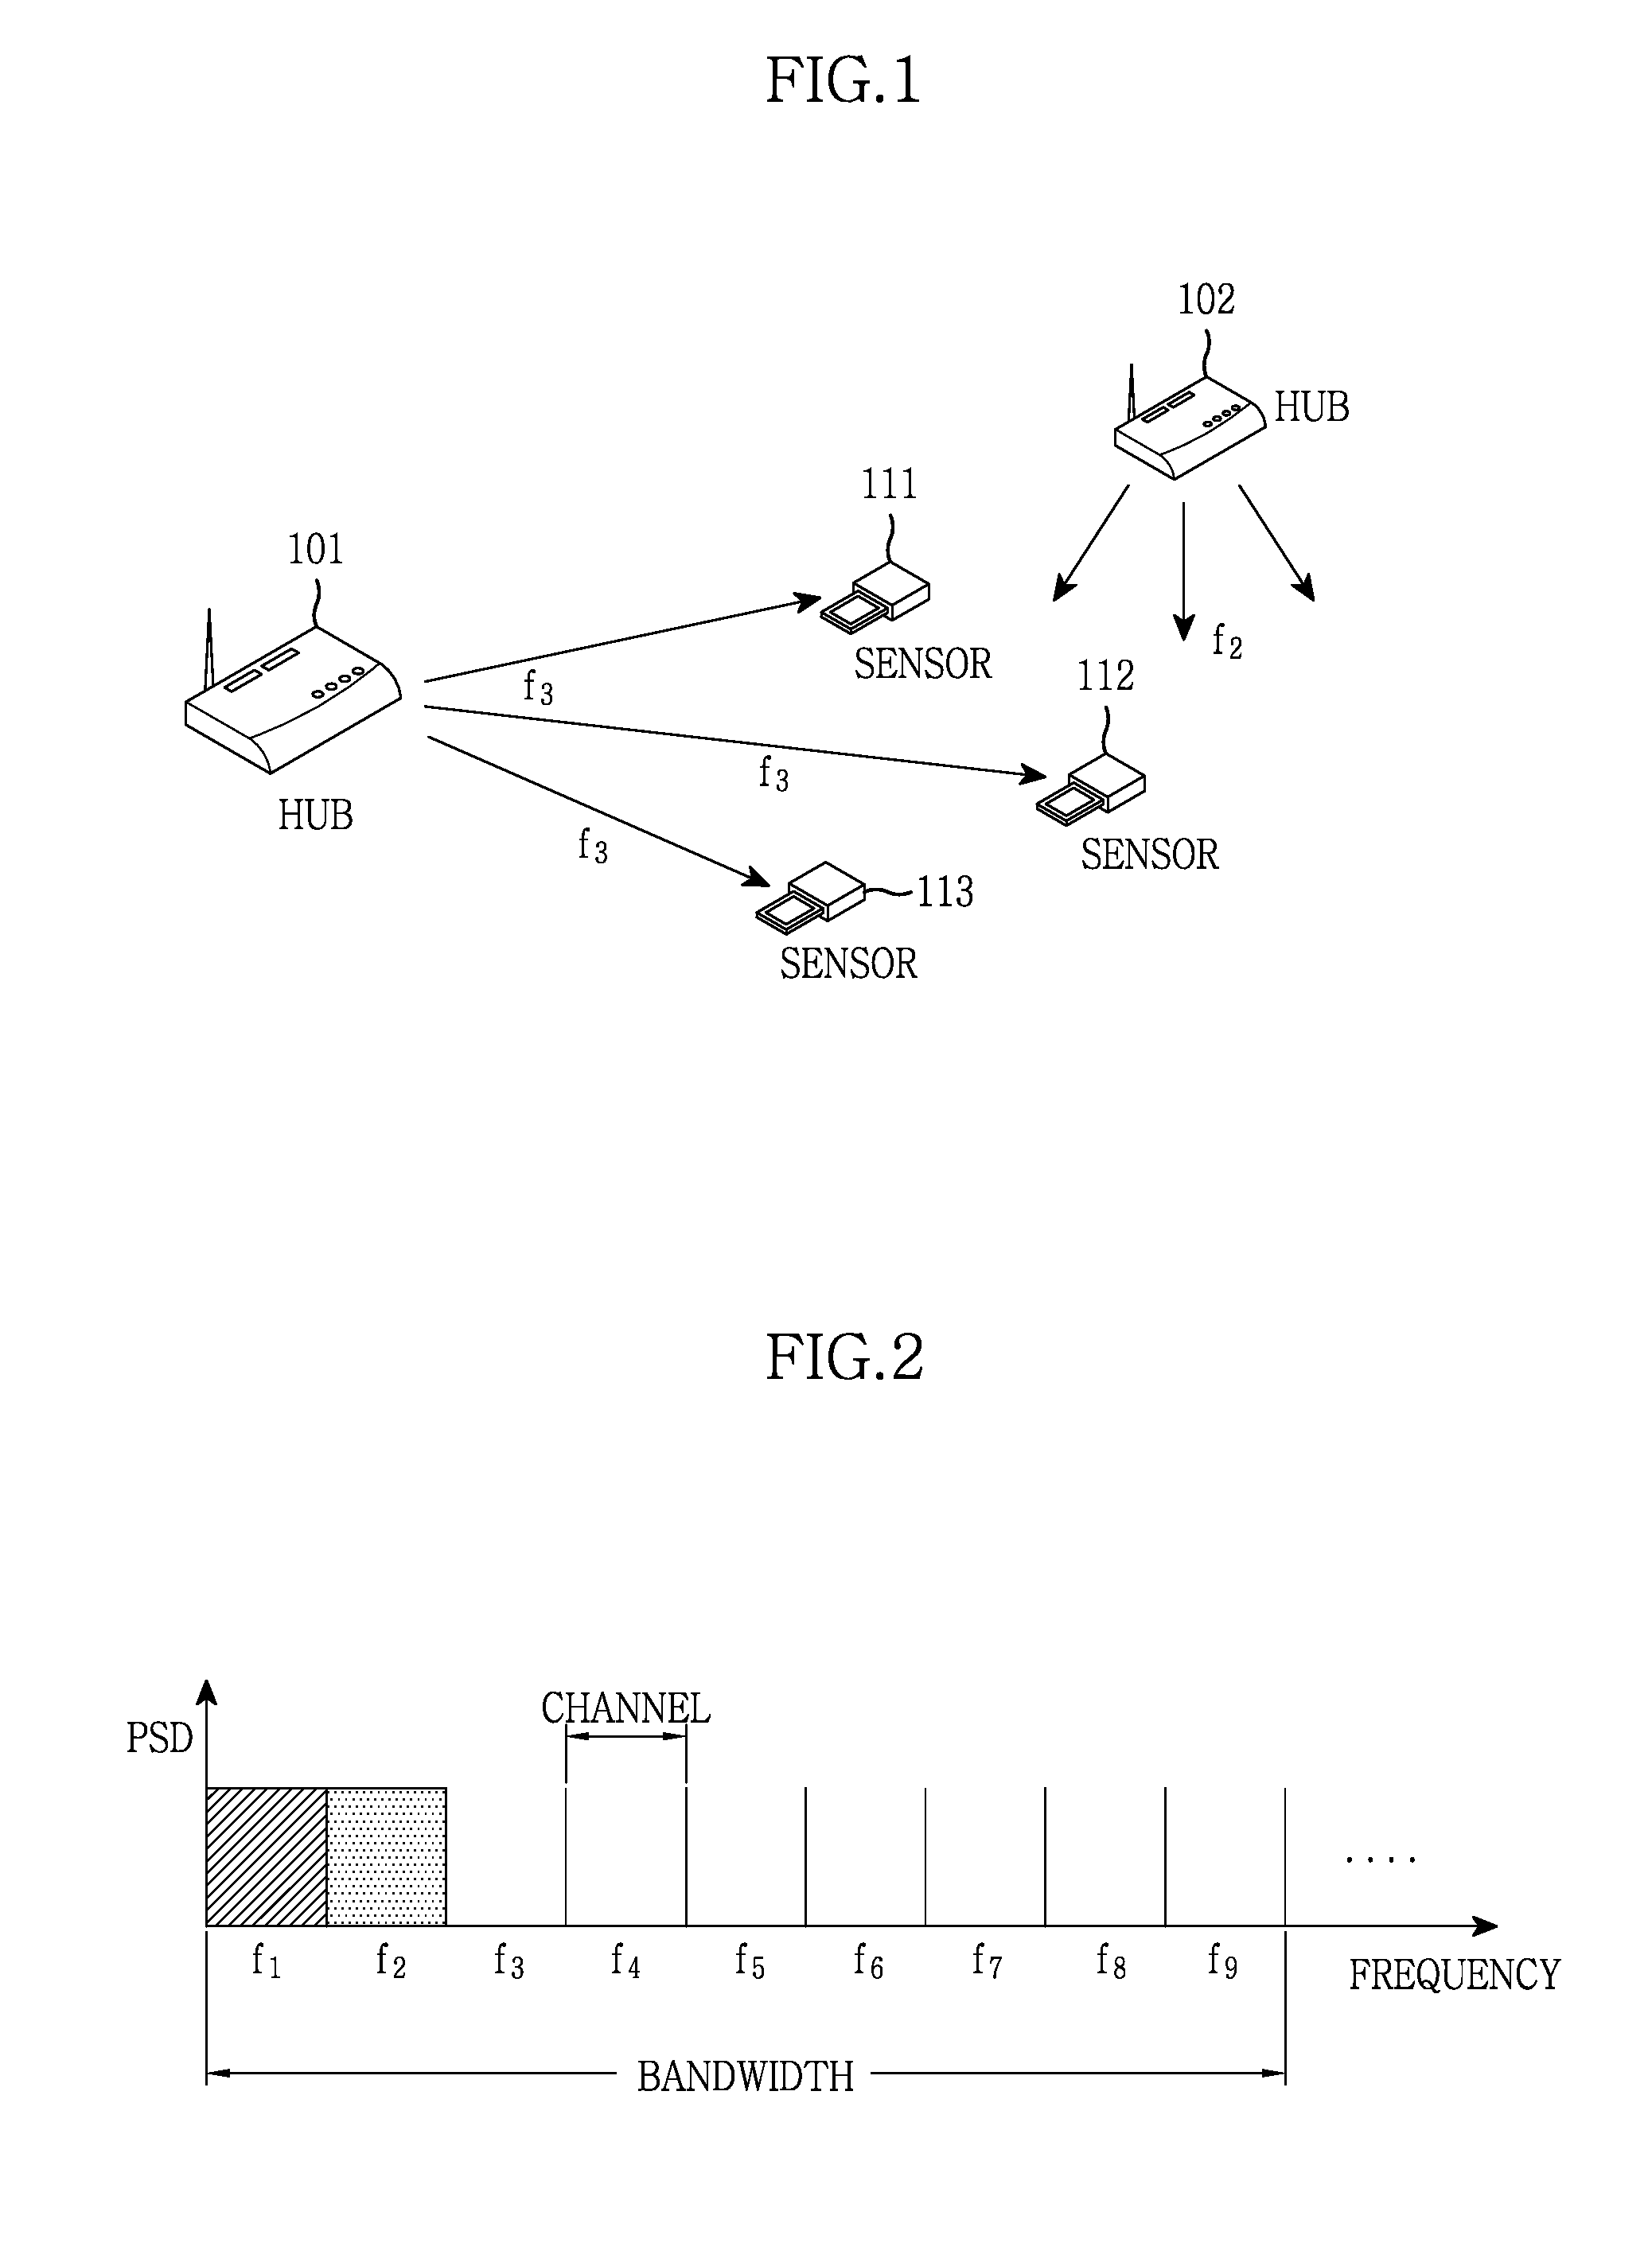 Local wireless communication system and method employing frequency-variable signal detection